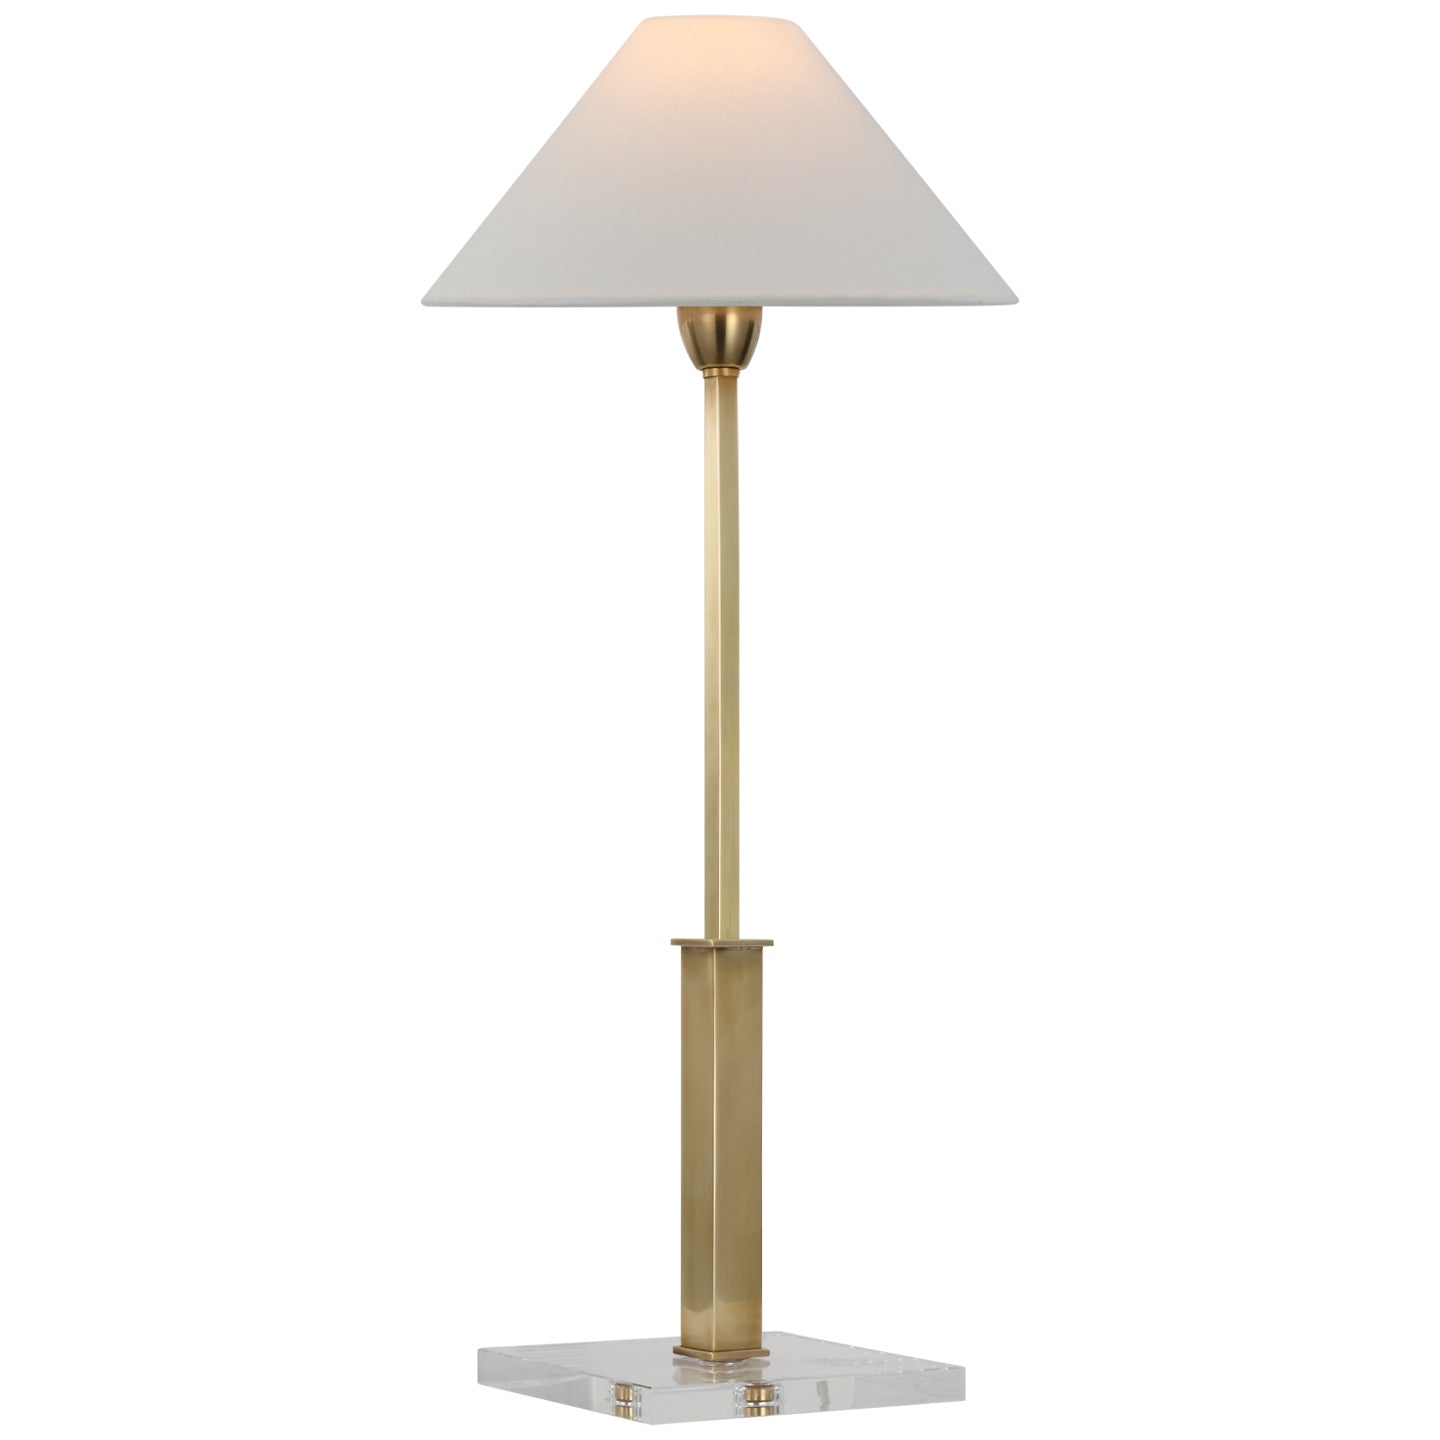 Visual Comfort Signature - SP 3510HAB/CG-L - LED Table Lamp - Asher - Hand-Rubbed Antique Brass and Crystal